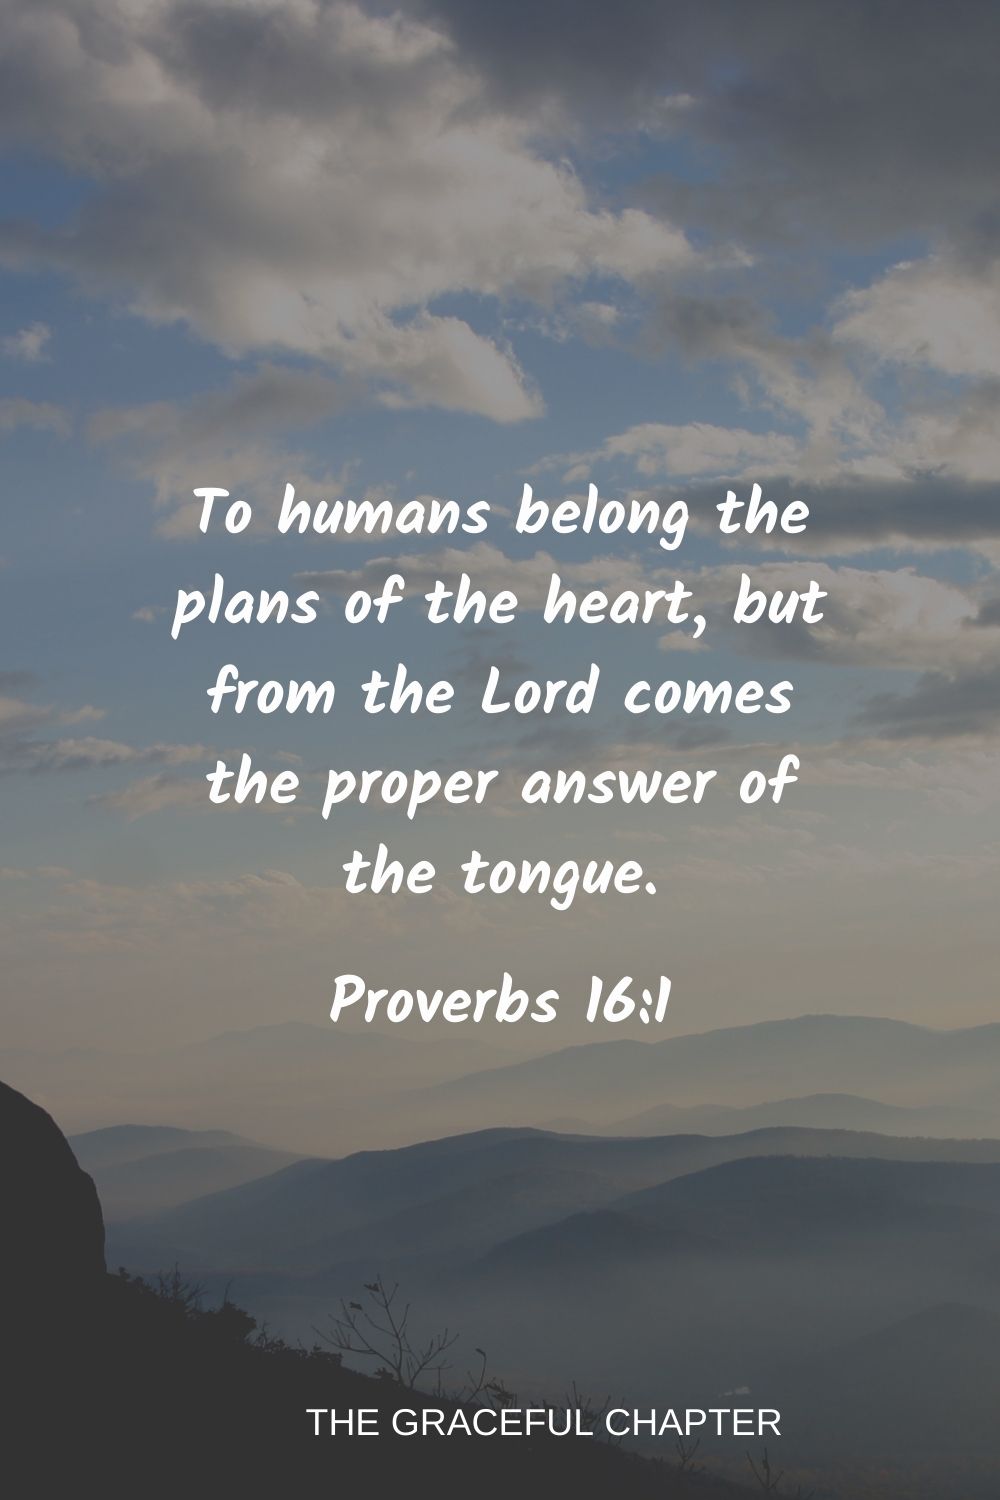 To humans belong the plans of the heart, but from the Lord comes the proper answer of the tongue. Proverbs 16:1